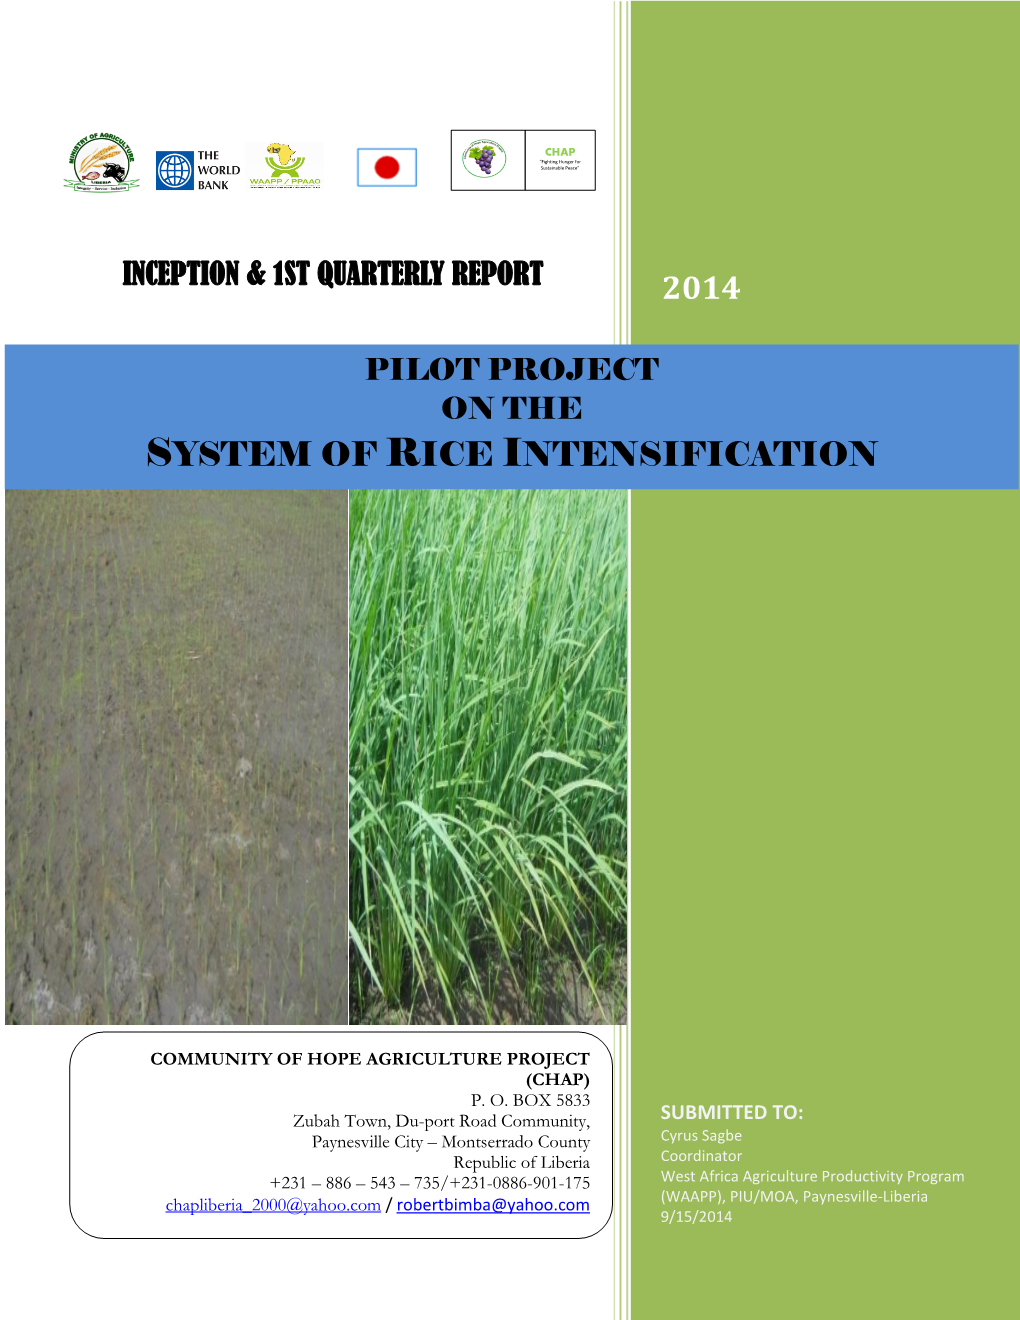 Pilot Project on the System of Rice